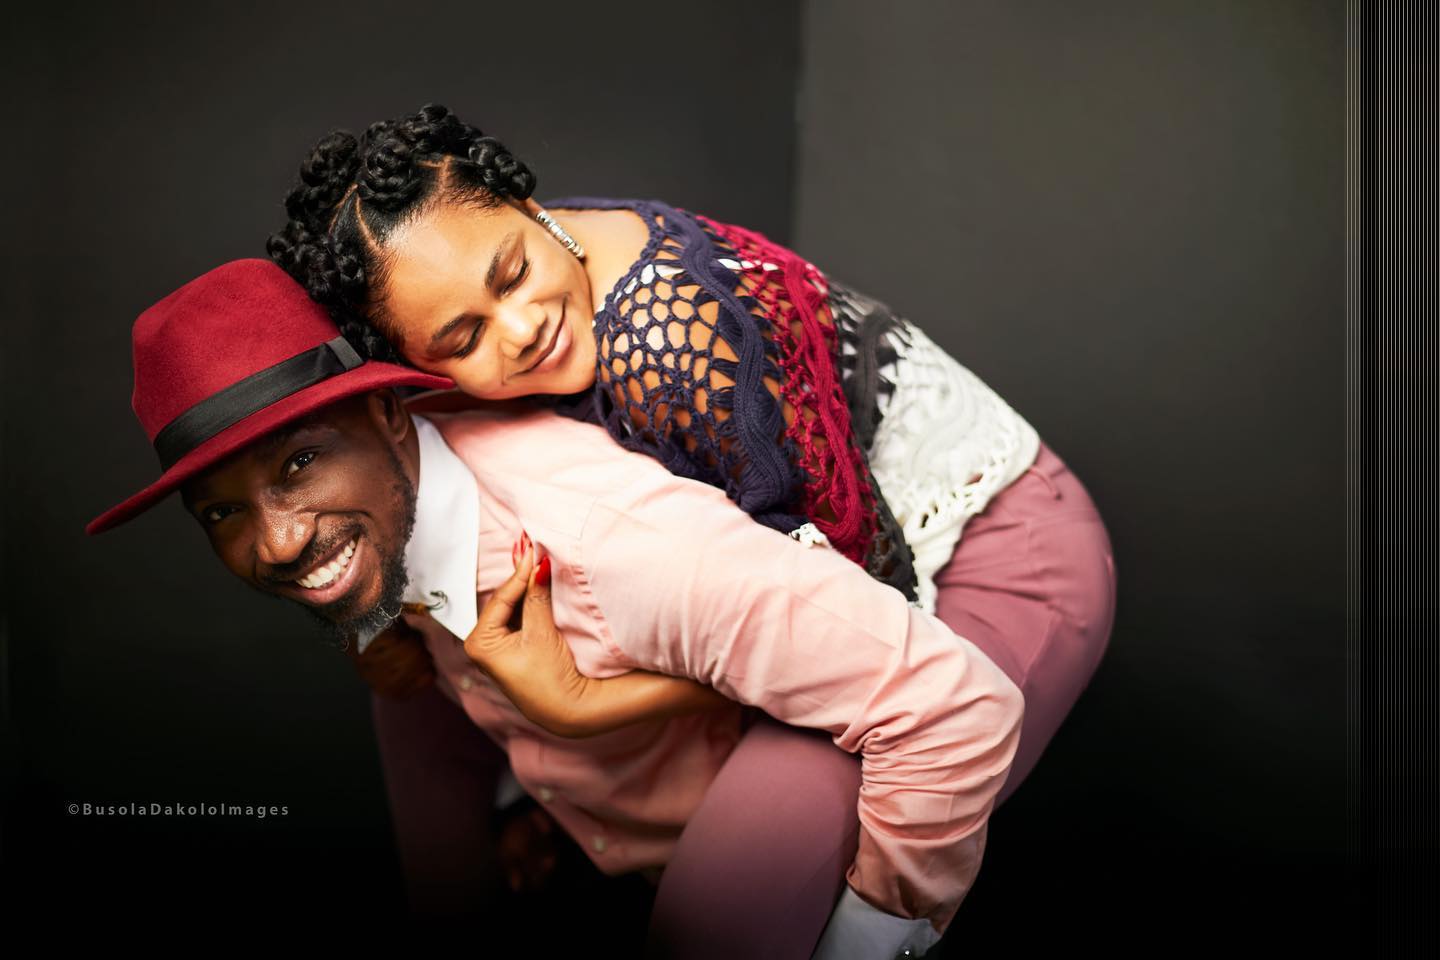  Timi and Busola Dakolo Reminds Us That True Love Will Stand The Test Of Time